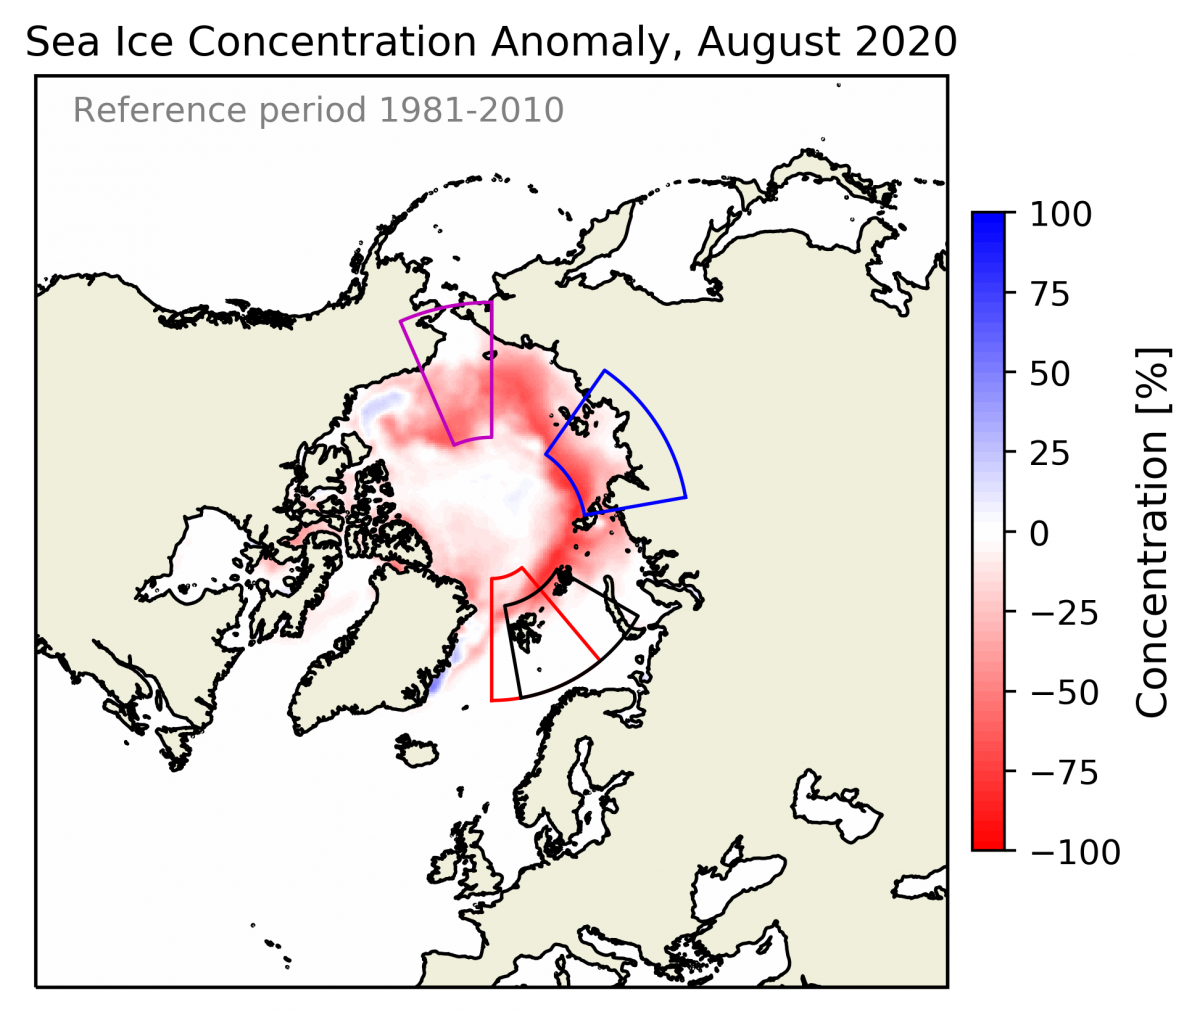 Arctic sea-ice concentration anomaly August 2020